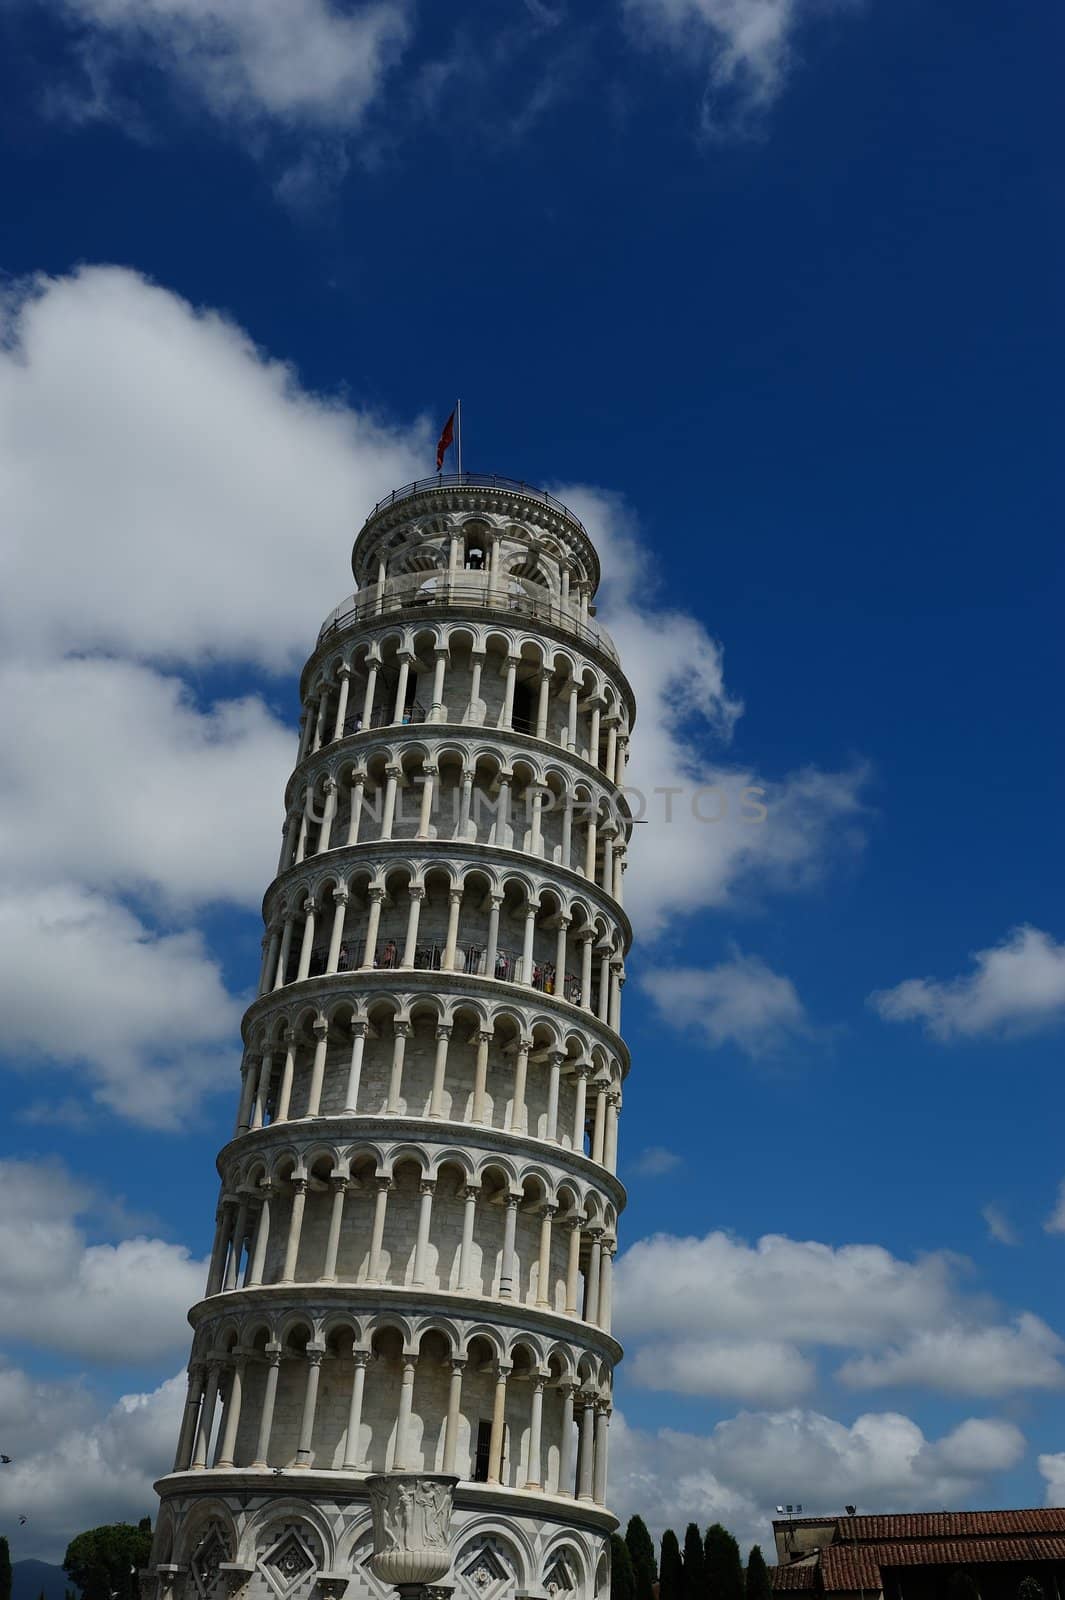 The famous Leaning tower of Pisa, Italy